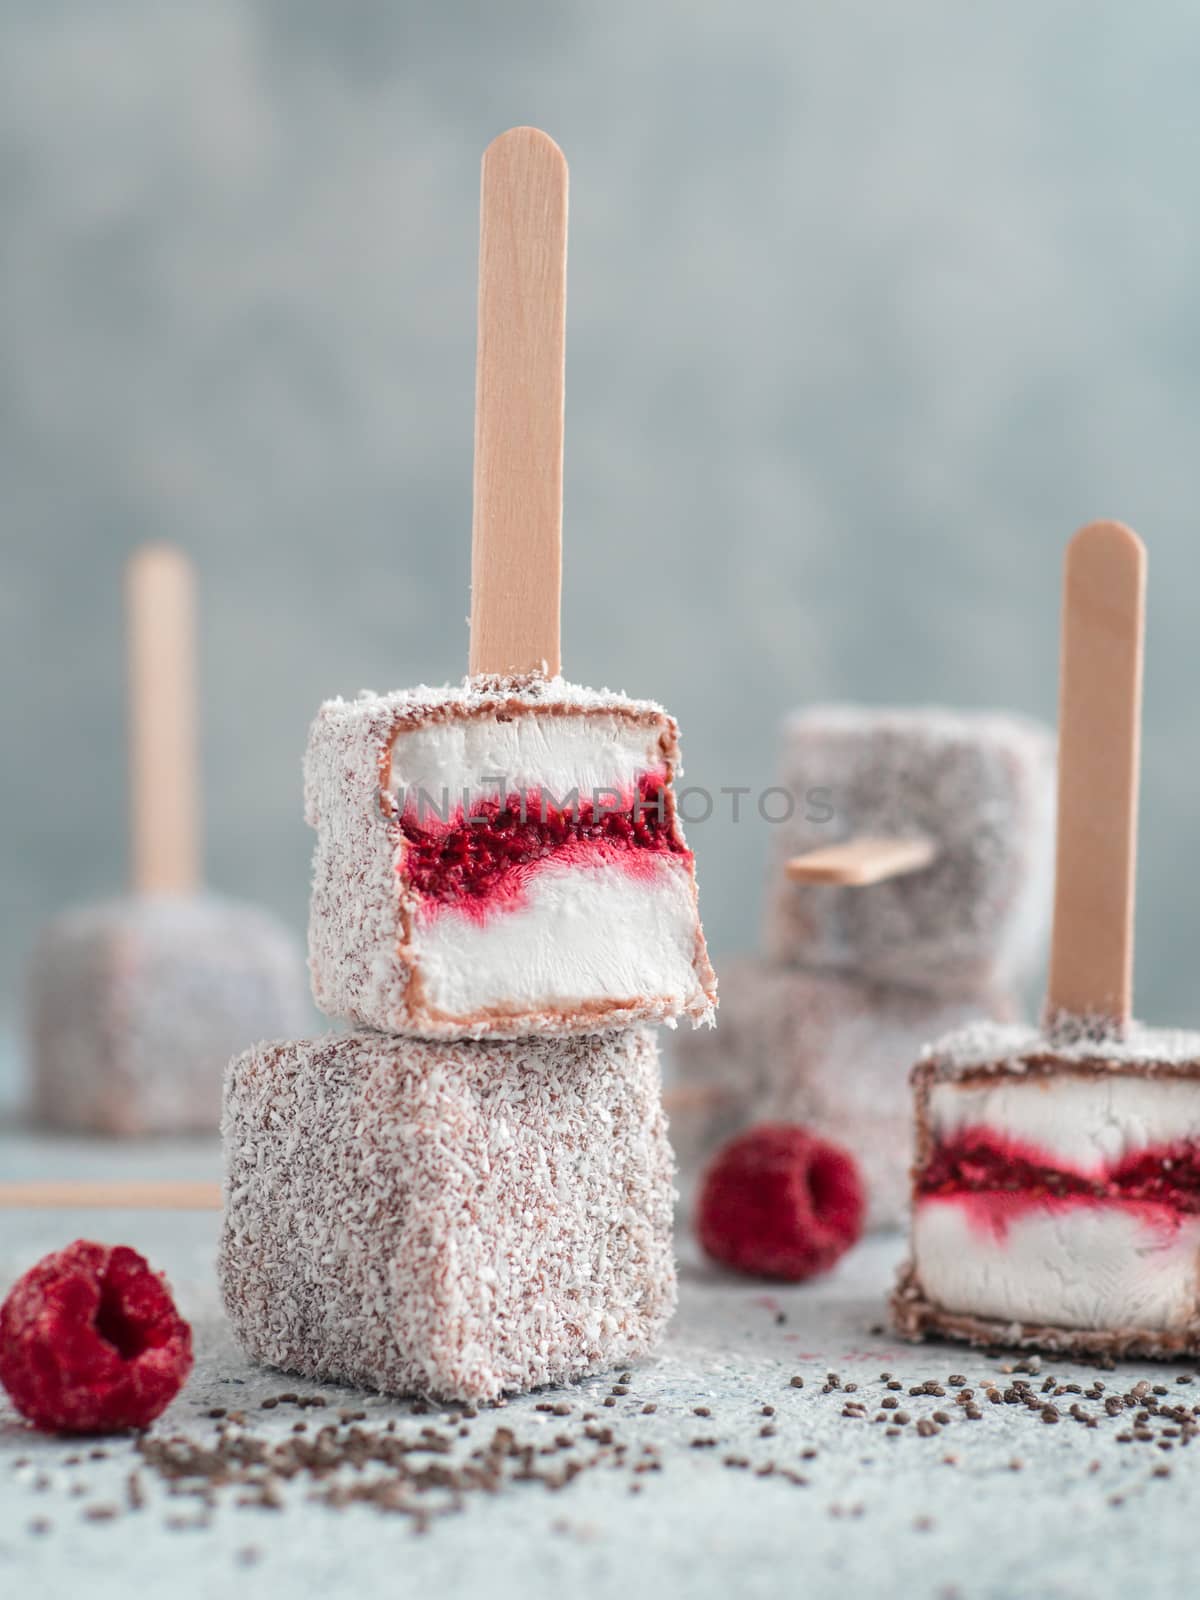 Homemade raw lamington ice cream pops on gray background. Australian sweet dessert lamington with chia and raspberries jam, chocolate and cocoa coat. Vegan food recipe and idea. Copy space for text